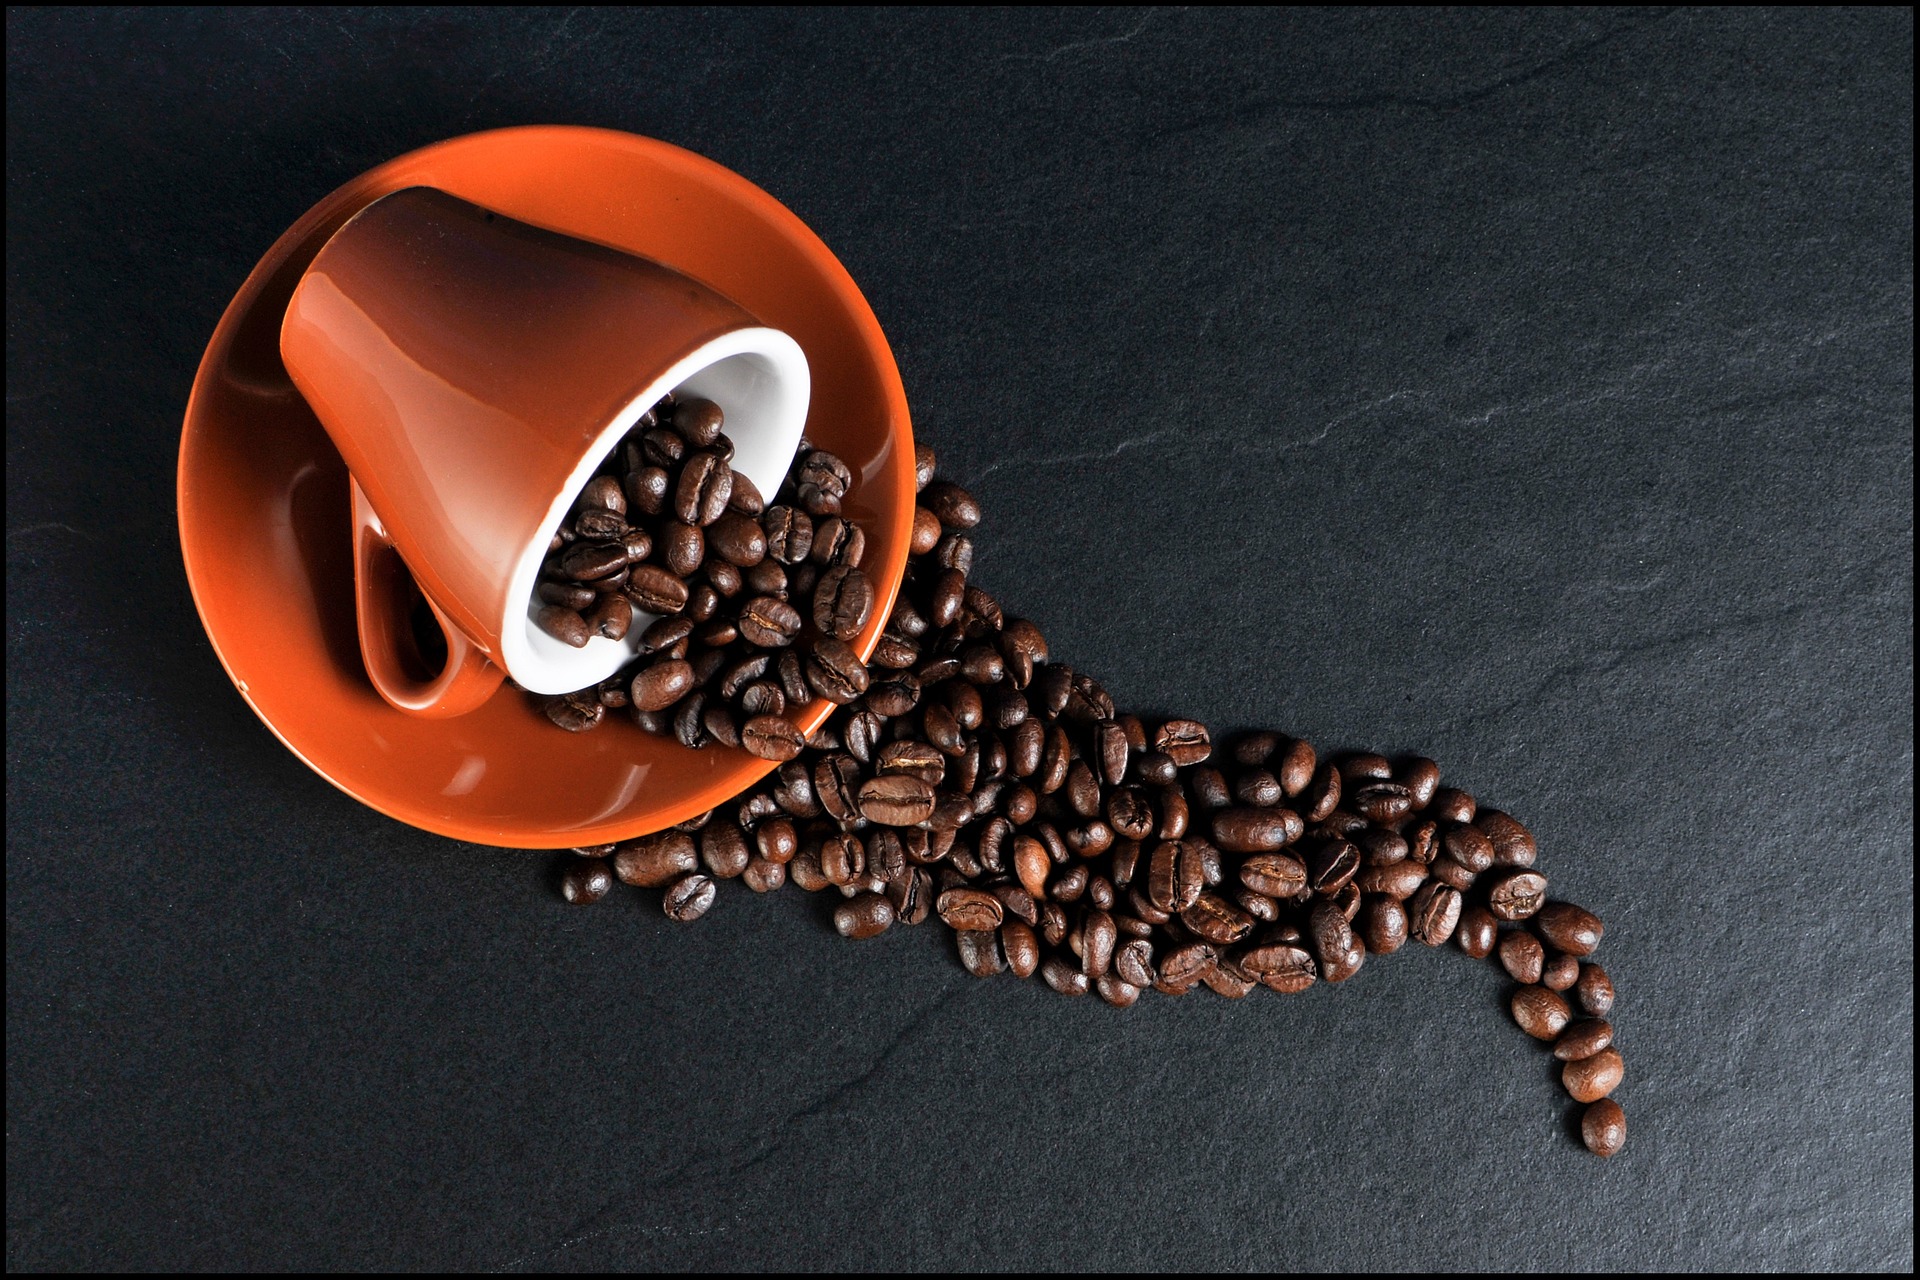 A cup fallen over with spilled coffee beans